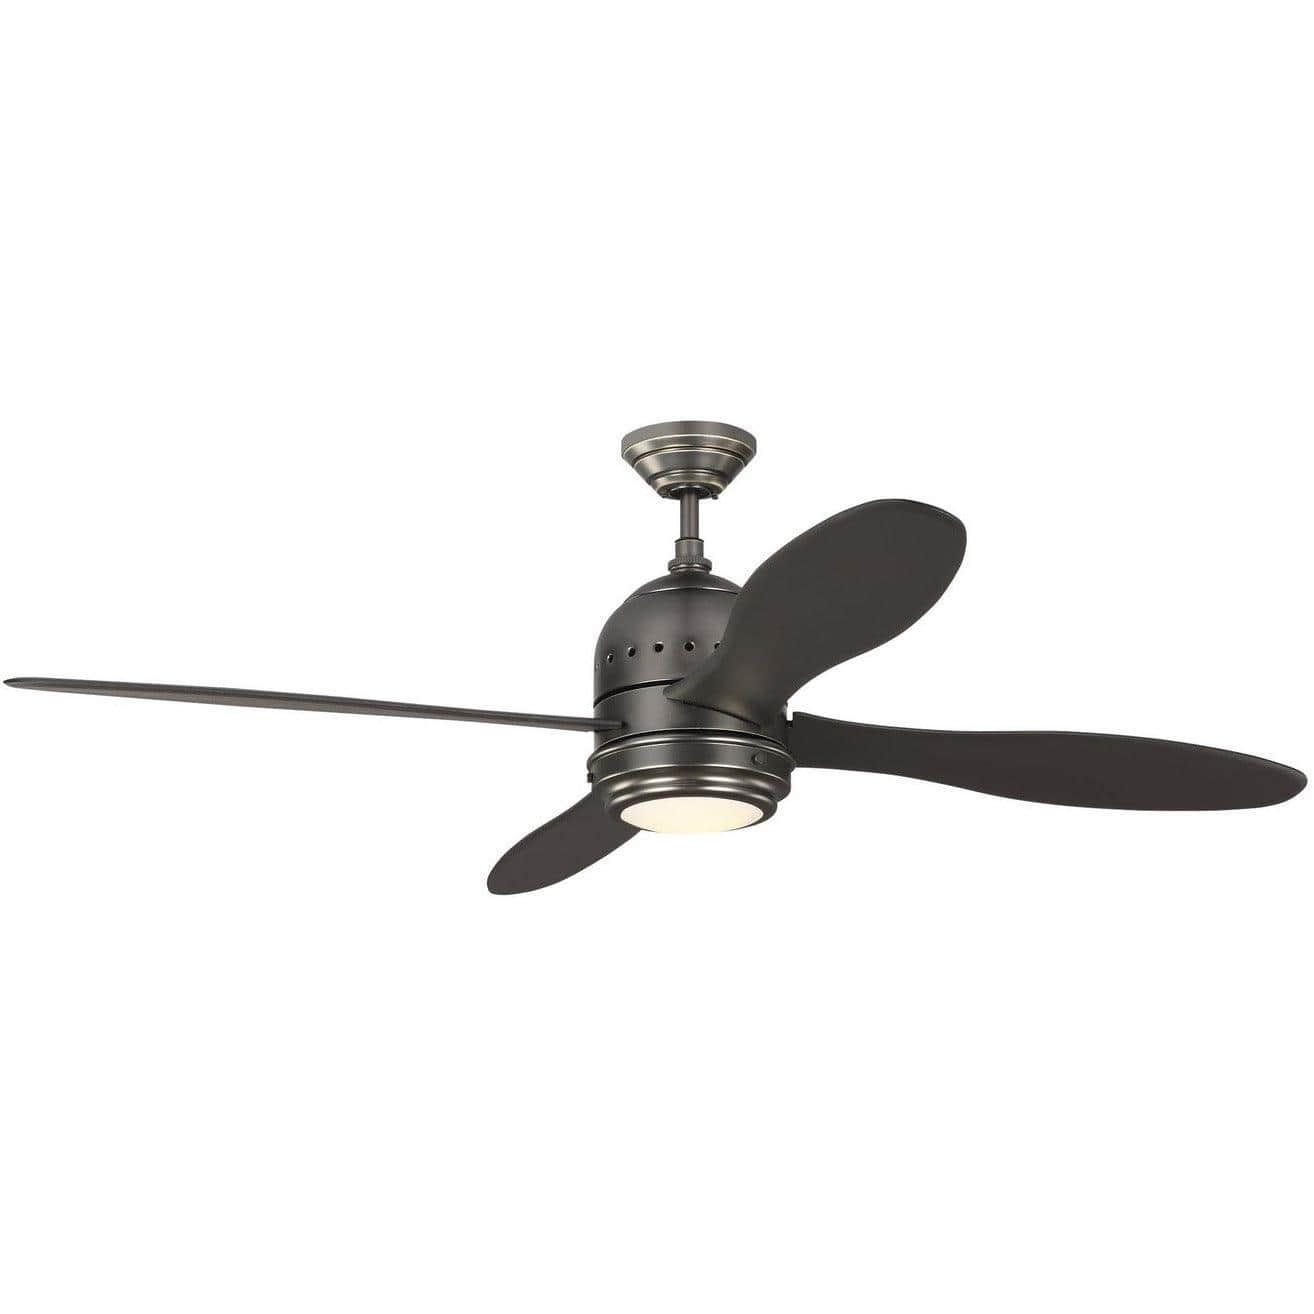 Visual Comfort Fan Collection - Metrograph 56" Ceiling Fan - 4TSR56BNZD | Montreal Lighting & Hardware